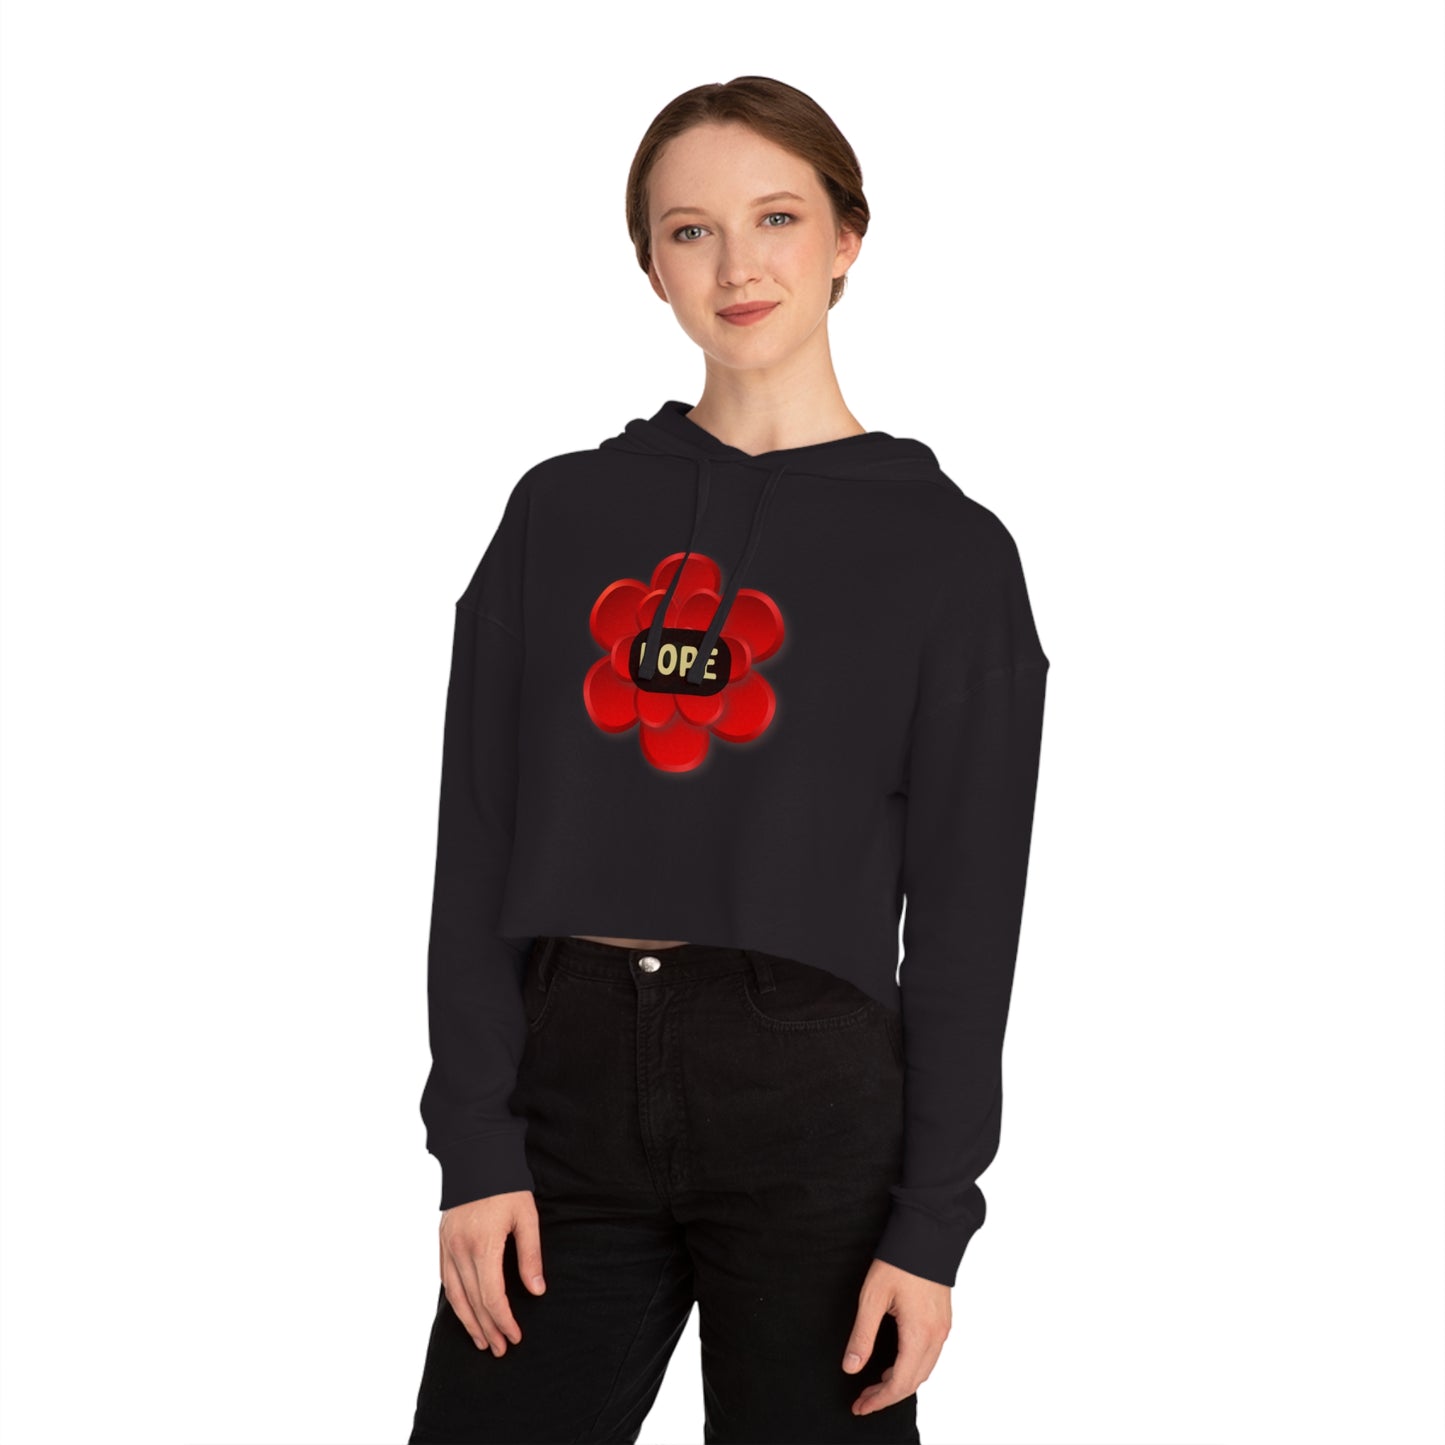 Bright “HOPE” with within red flower design on this stylish Women’s Cropped Hooded Sweatshirt for your enjoyment.